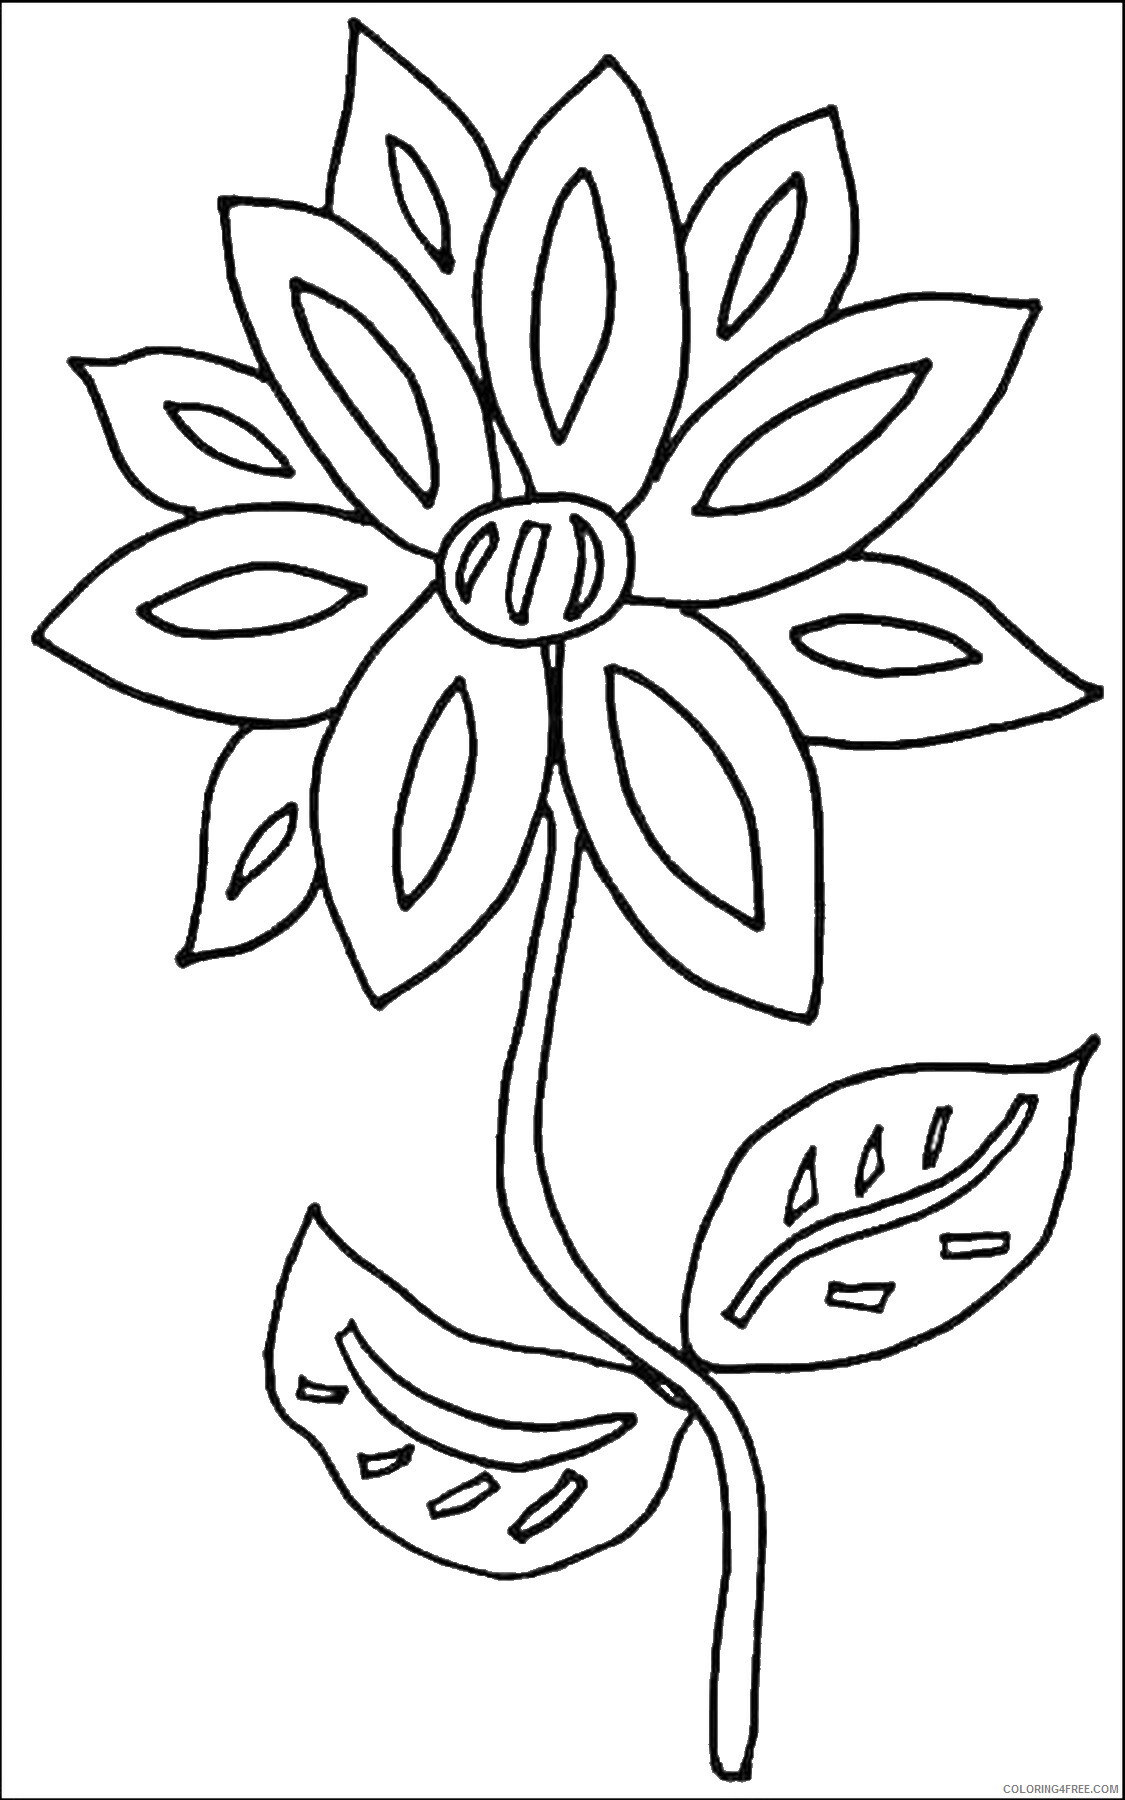 Printable Flower Coloring Pages Flowers Nature flowerc3 Printable 2021 382 Coloring4free